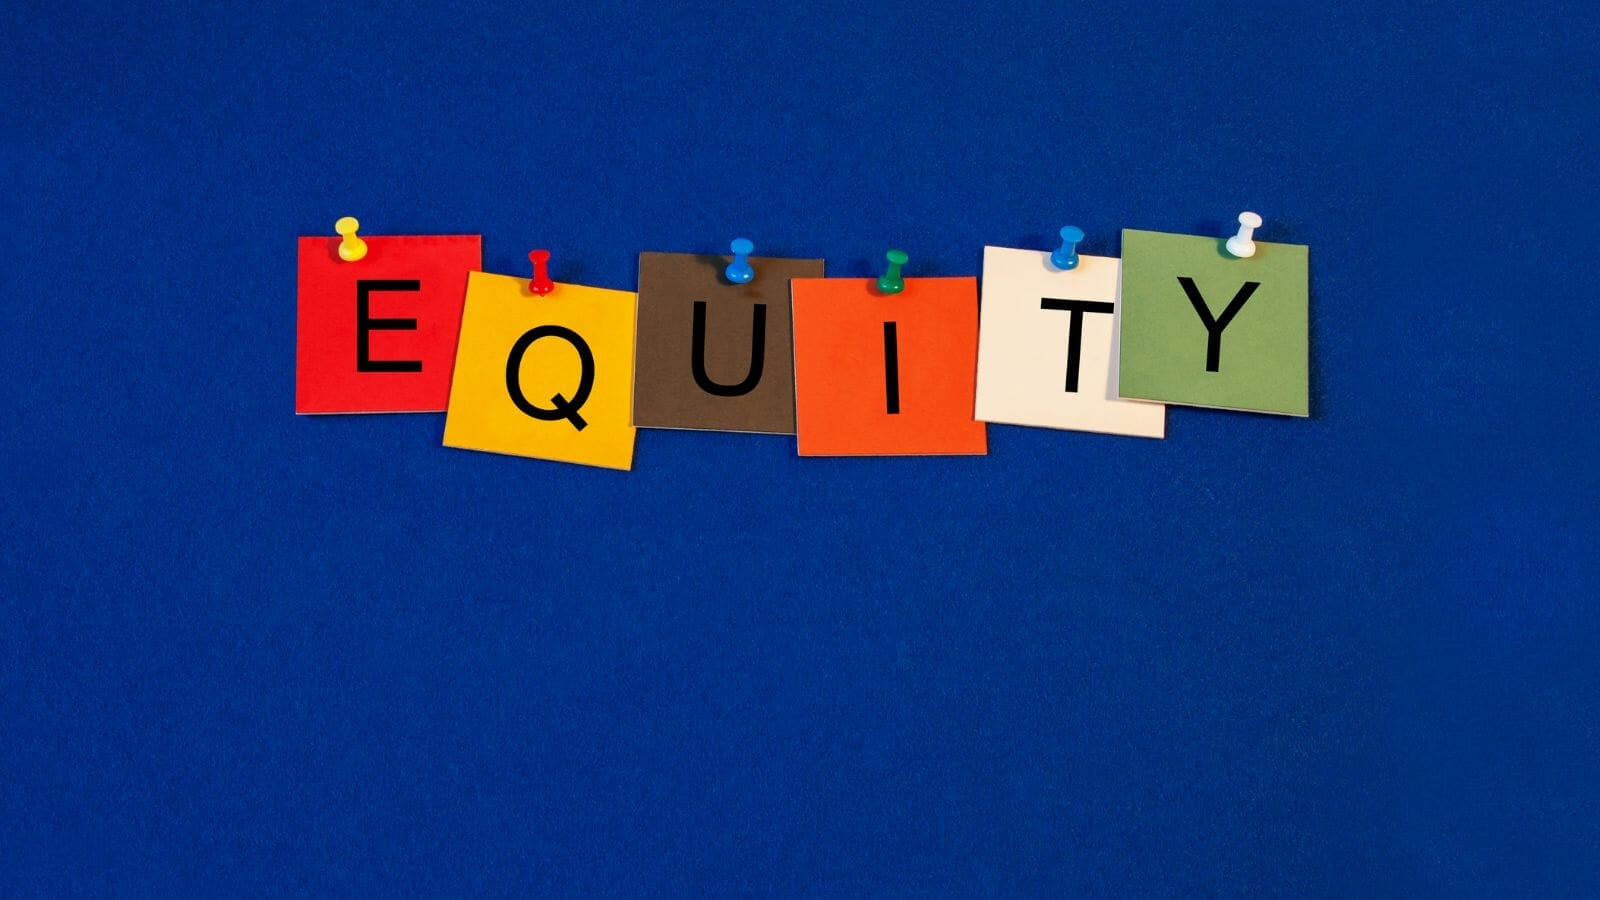 Several colorful papers attached to a blue board spelling the word equity

